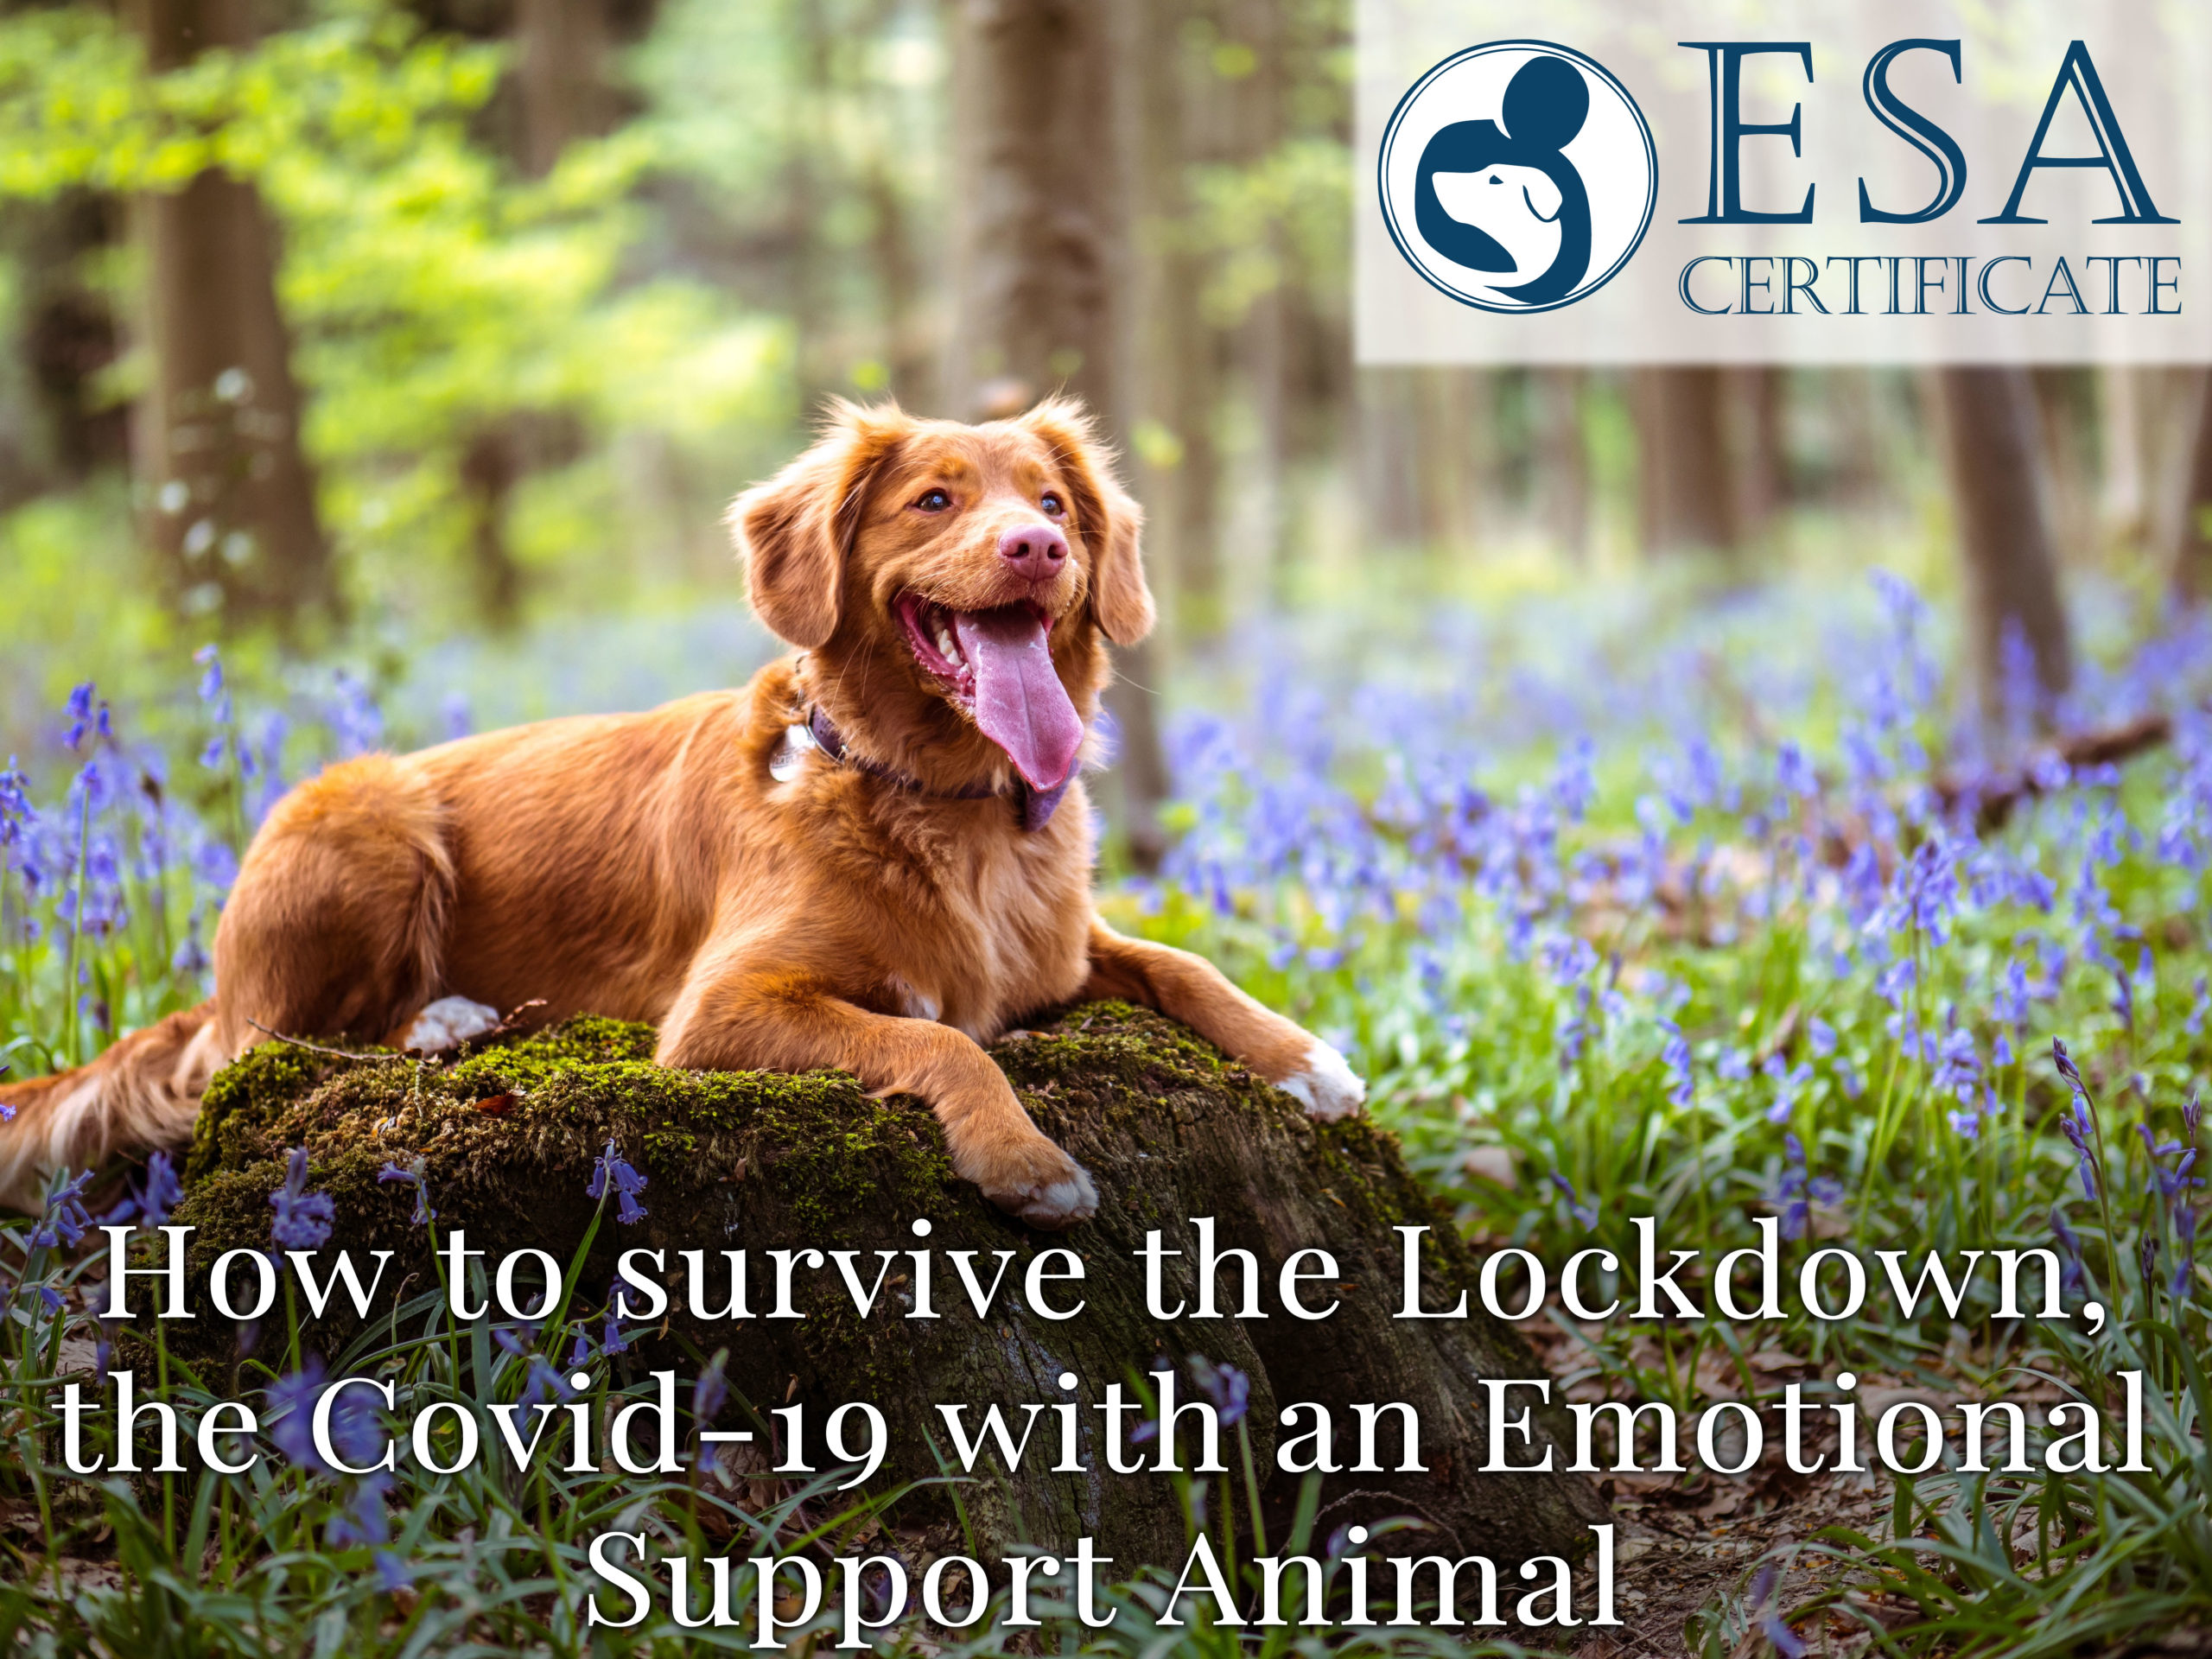 Featured Image of "How to survive the Lockdown, the COVID-19 with an Emotional Support Animal?"